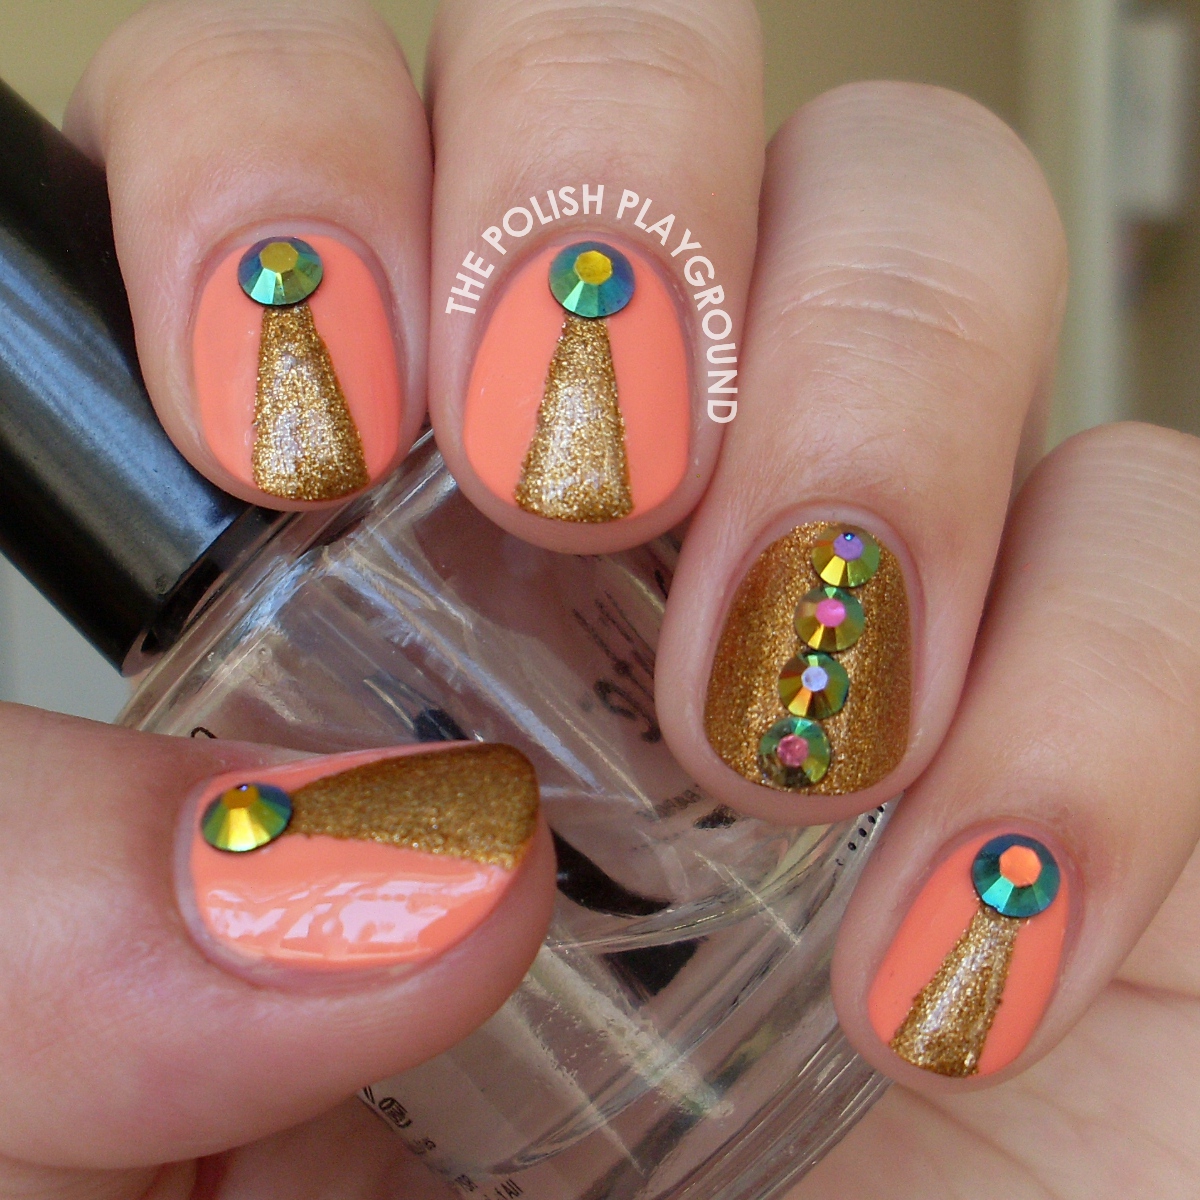 Peach and Gold with Round Rhinestones Nail Art